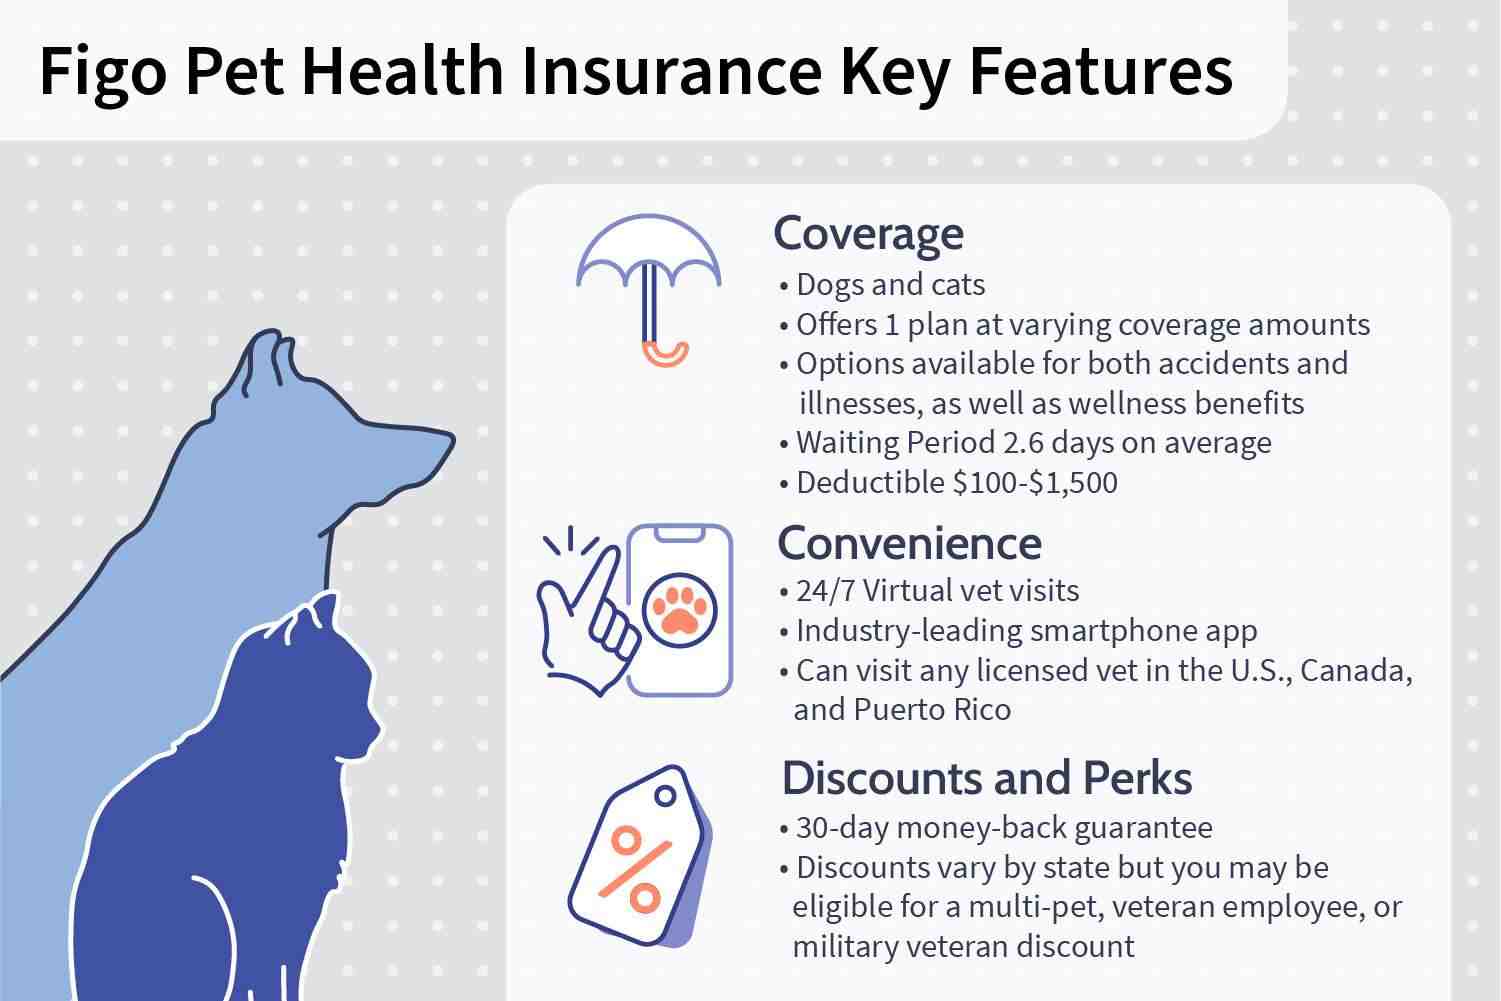 Does insurance cover anything before deductible?